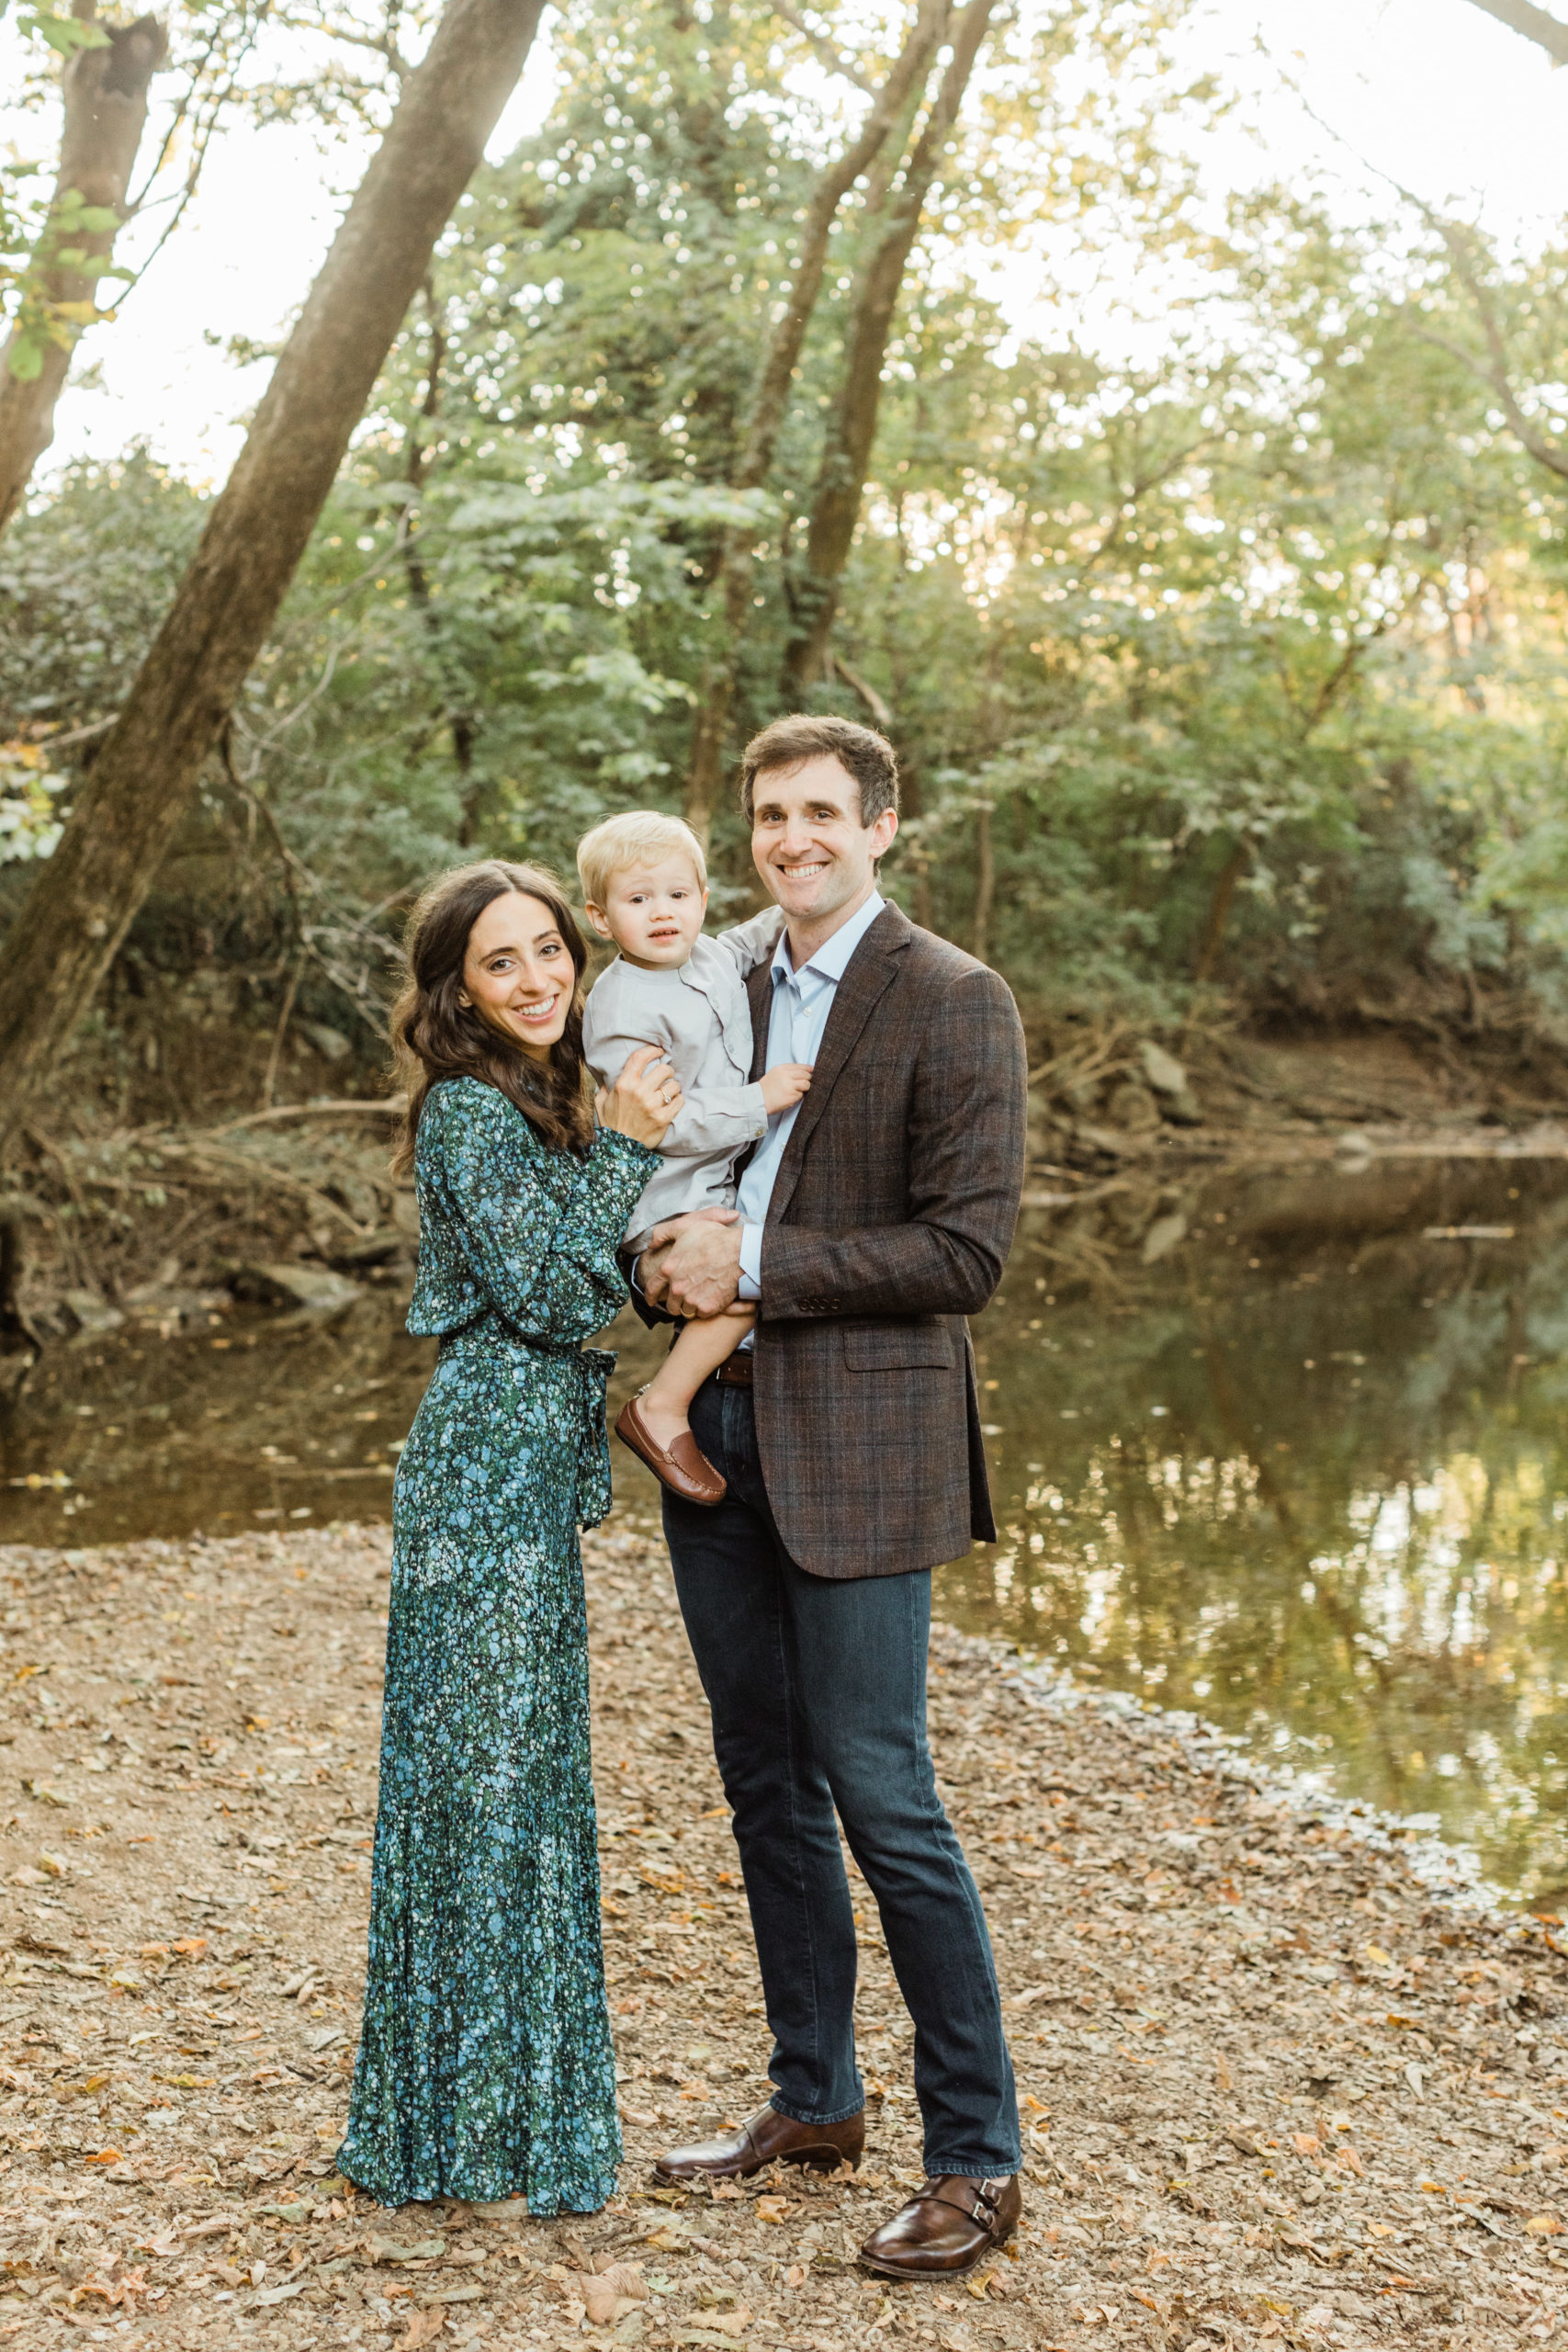 Photo of family of three outdoors for fall family session. Dad wearing plaid blazer, mom wearing green and blue long sleeve maxi dress, baby boy wearing light blue button up. Family smiling at each other.